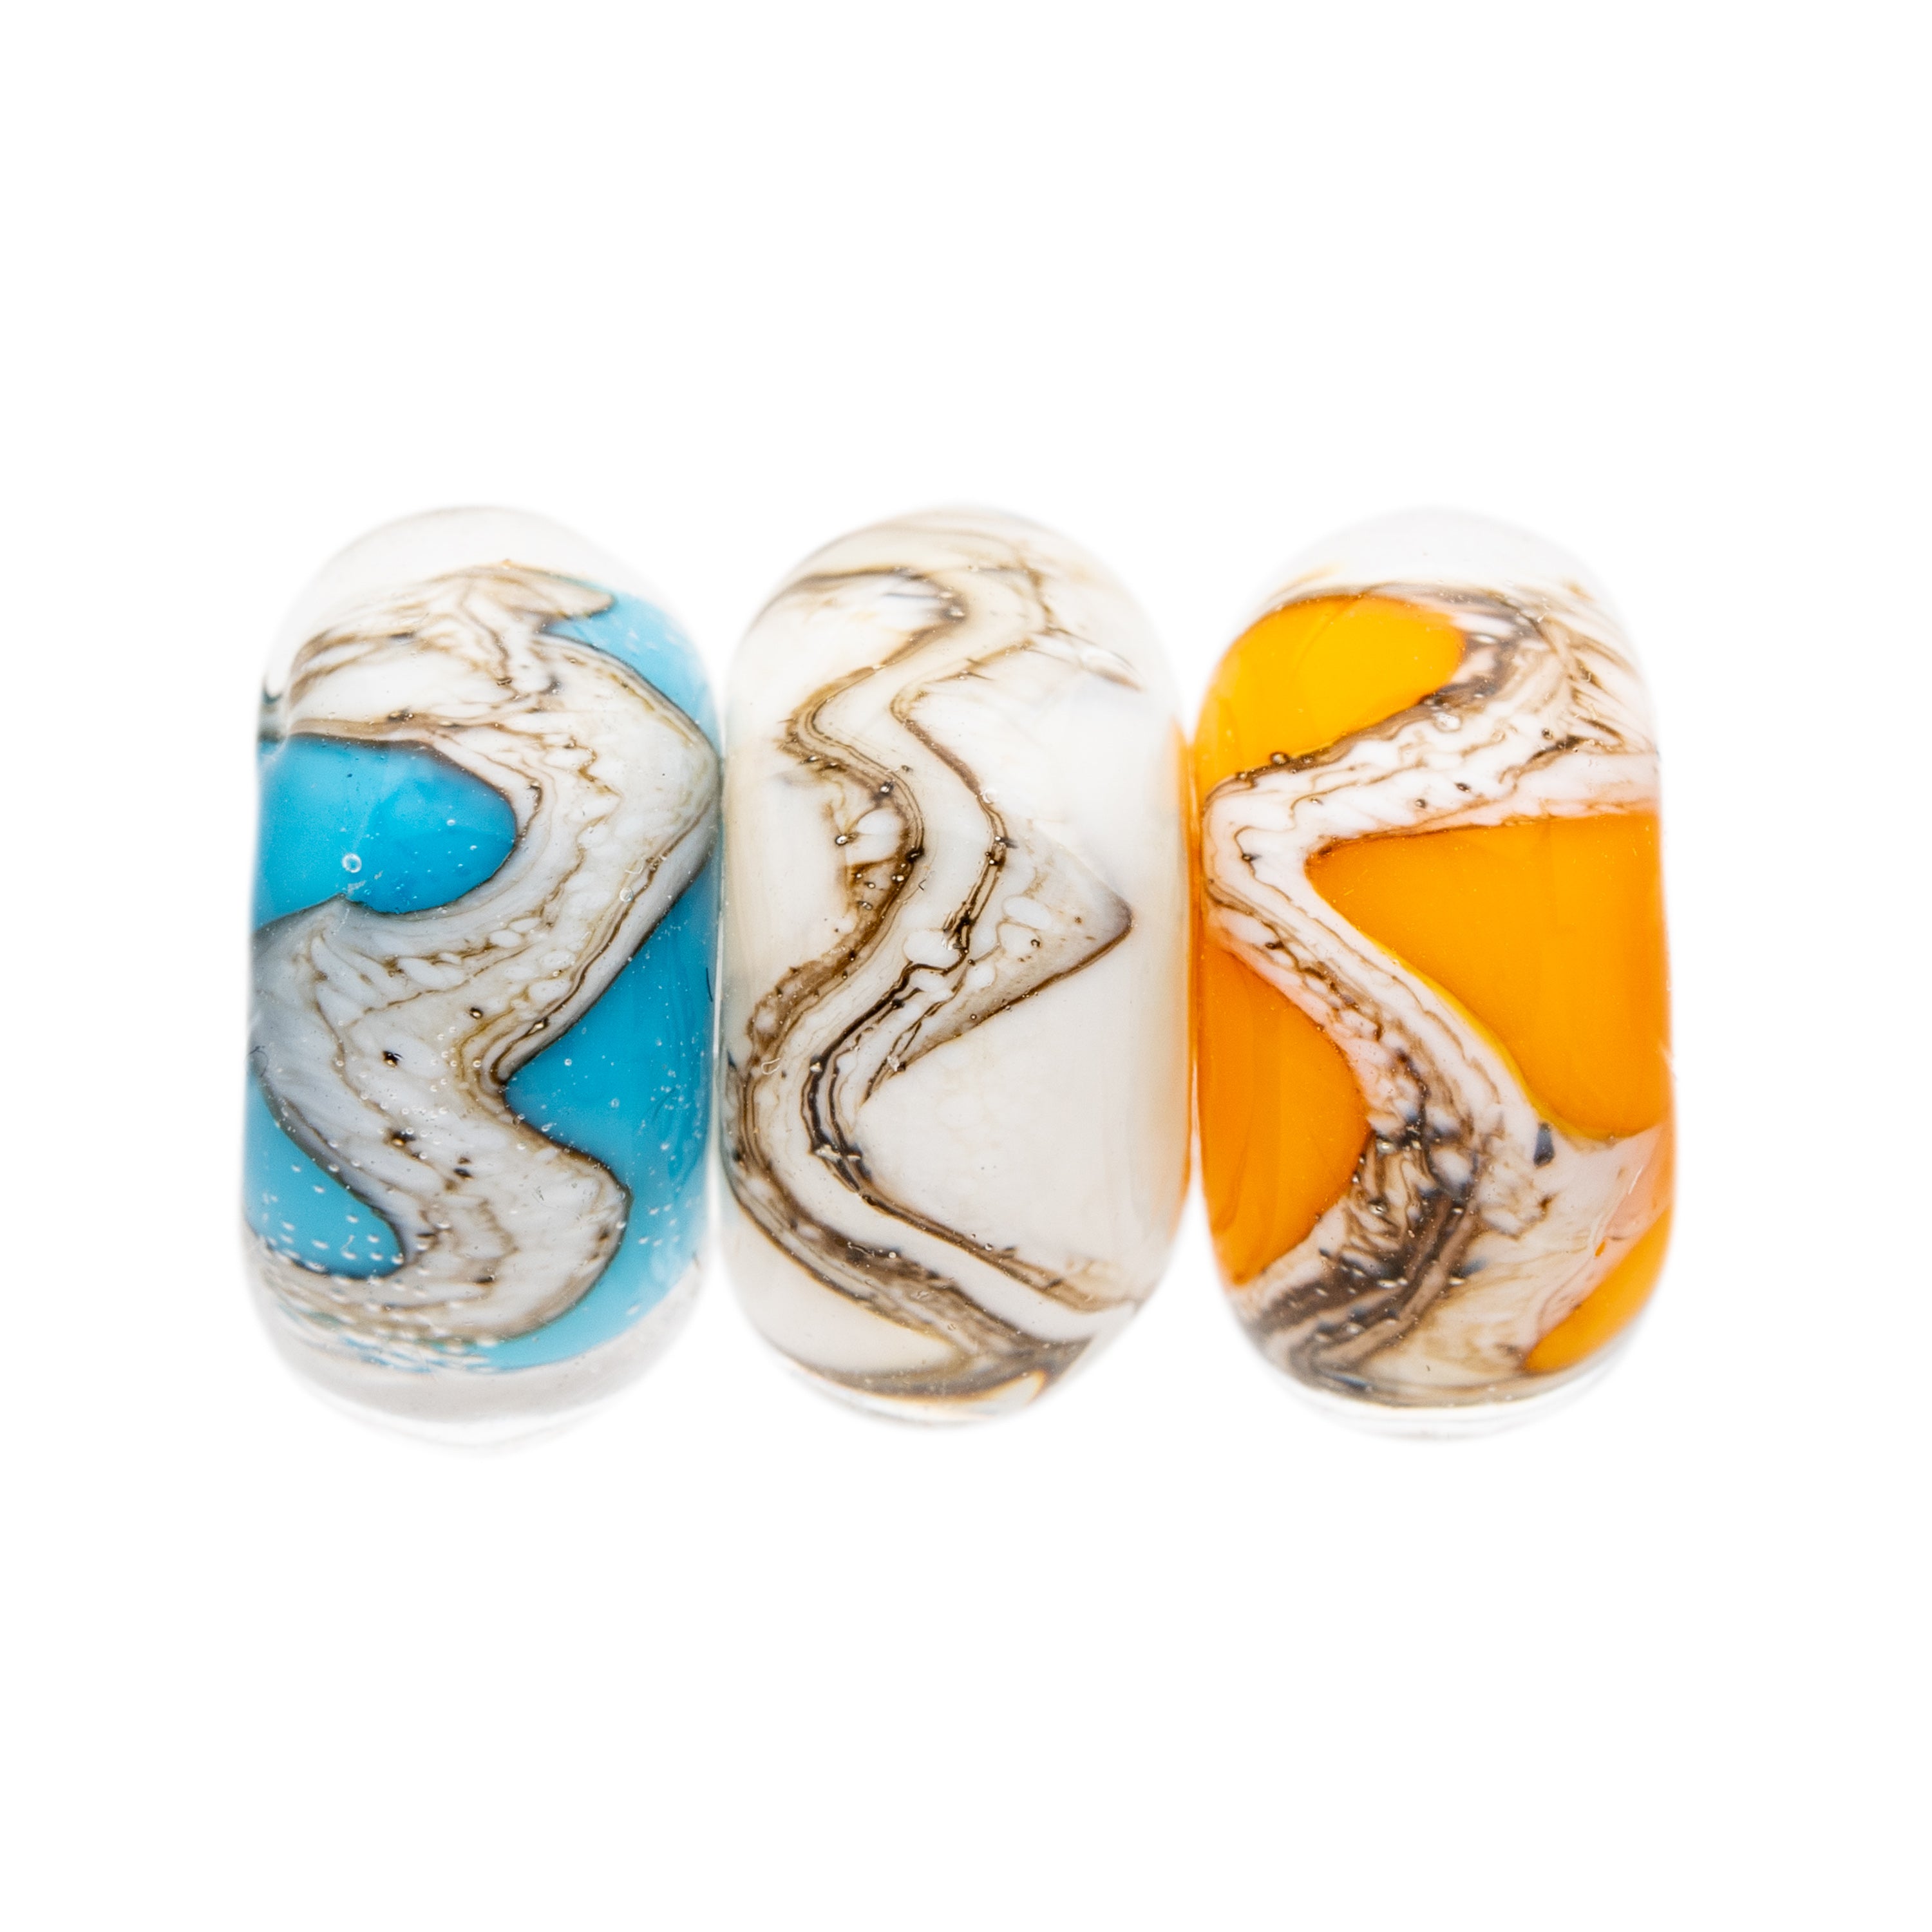 Turquoise, white and orange glass beads wrapped with swirling silver sand pattern, representing the Sussex Coastline.